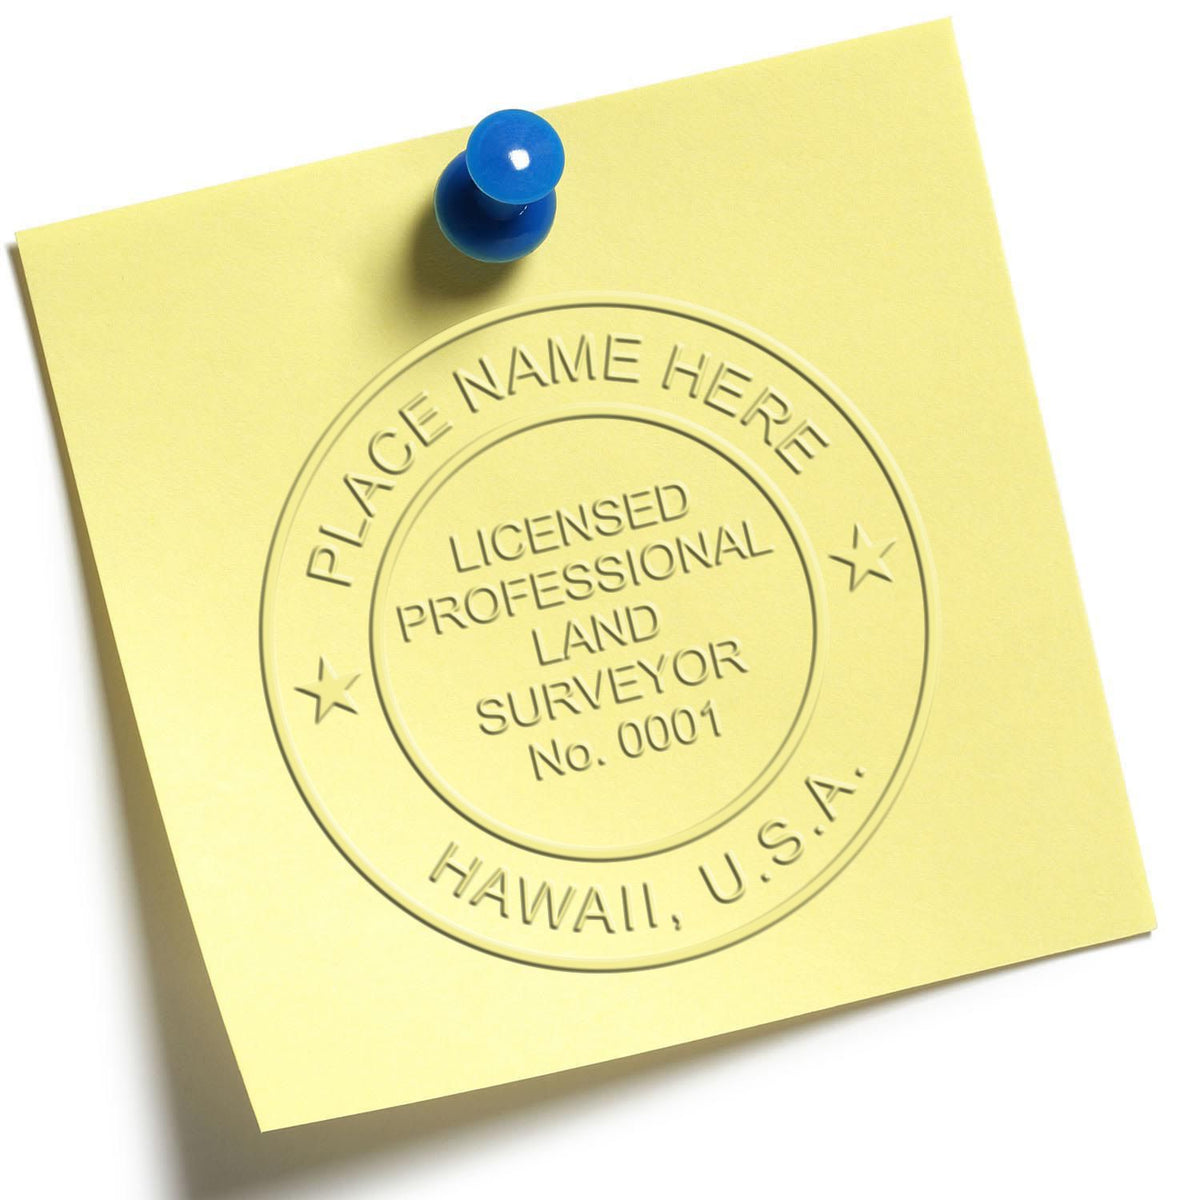 An alternative view of the Handheld Hawaii Land Surveyor Seal stamped on a sheet of paper showing the image in use